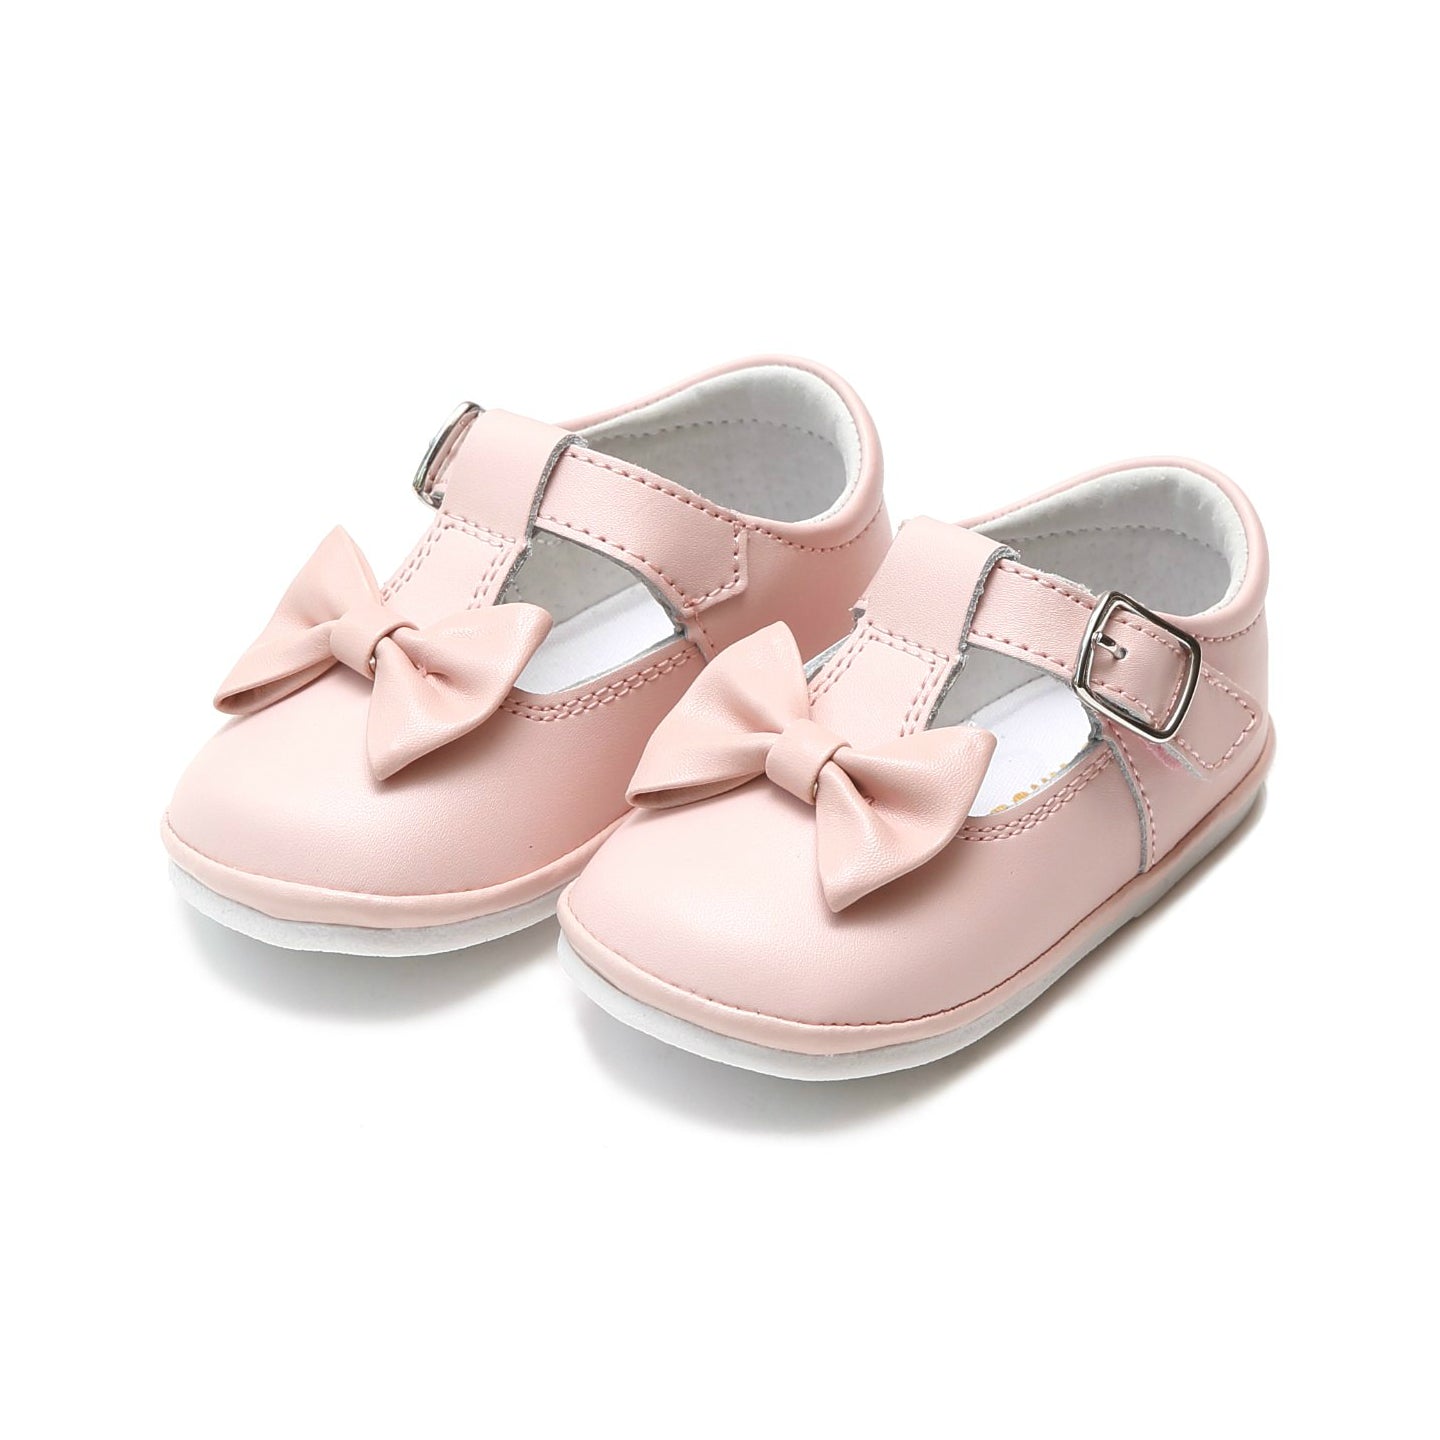 Minnie Bow Leather Mary Jane - Babies & Toddlers